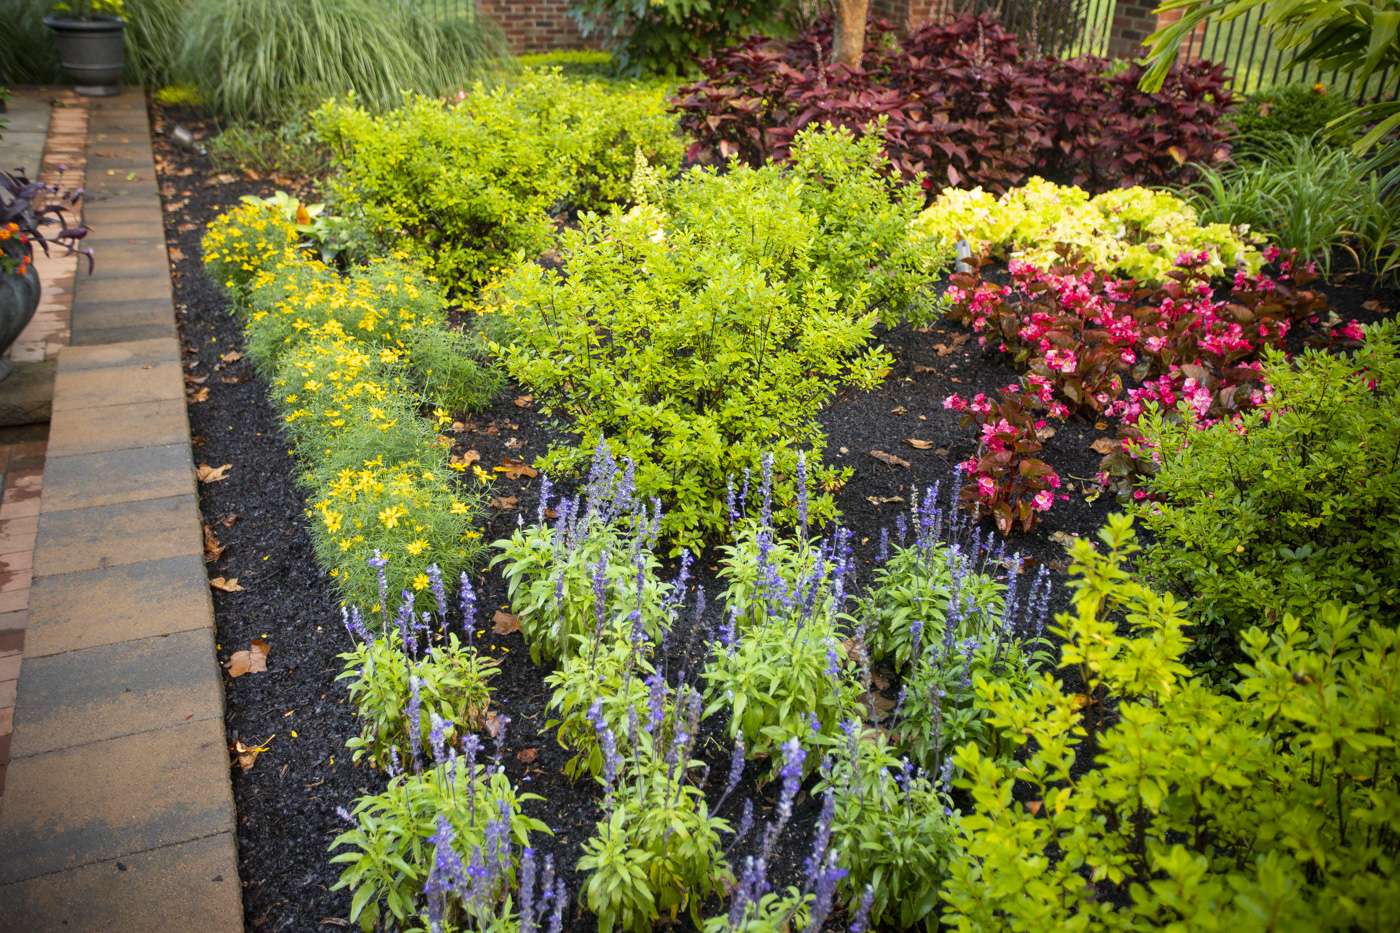 Dividing Perennials: Why and When to Divide Your Perennials